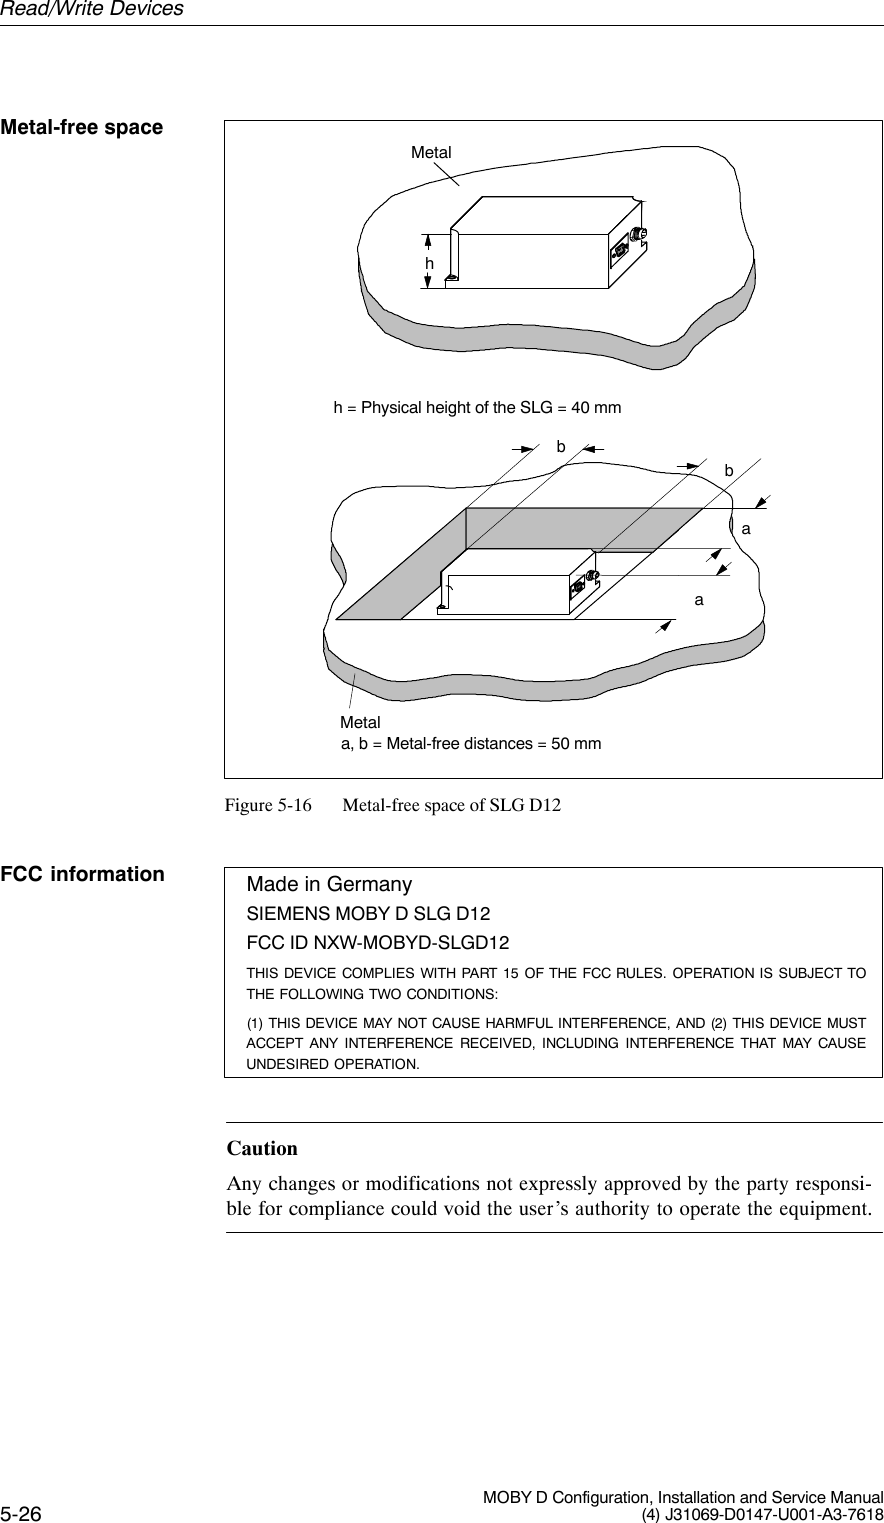 5-26 MOBY D Configuration, Installation and Service Manual(4) J31069-D0147-U001-A3-7618Metalh = Physical height of the SLG = 40 mmhbMetala, b = Metal-free distances = 50 mmbaaFigure 5-16 Metal-free space of SLG D12Made in GermanySIEMENS MOBY D SLG D12FCC ID NXW-MOBYD-SLGD12THIS DEVICE COMPLIES WITH PART 15 OF THE FCC RULES. OPERATION IS SUBJECT TOTHE FOLLOWING TWO CONDITIONS:(1) THIS DEVICE MAY NOT CAUSE HARMFUL INTERFERENCE, AND (2) THIS DEVICE MUSTACCEPT ANY INTERFERENCE RECEIVED, INCLUDING INTERFERENCE THAT MAY CAUSEUNDESIRED OPERATION.CautionAny changes or modifications not expressly approved by the party responsi-ble for compliance could void the user’s authority to operate the equipment.Metal-free spaceFCC informationRead/Write Devices